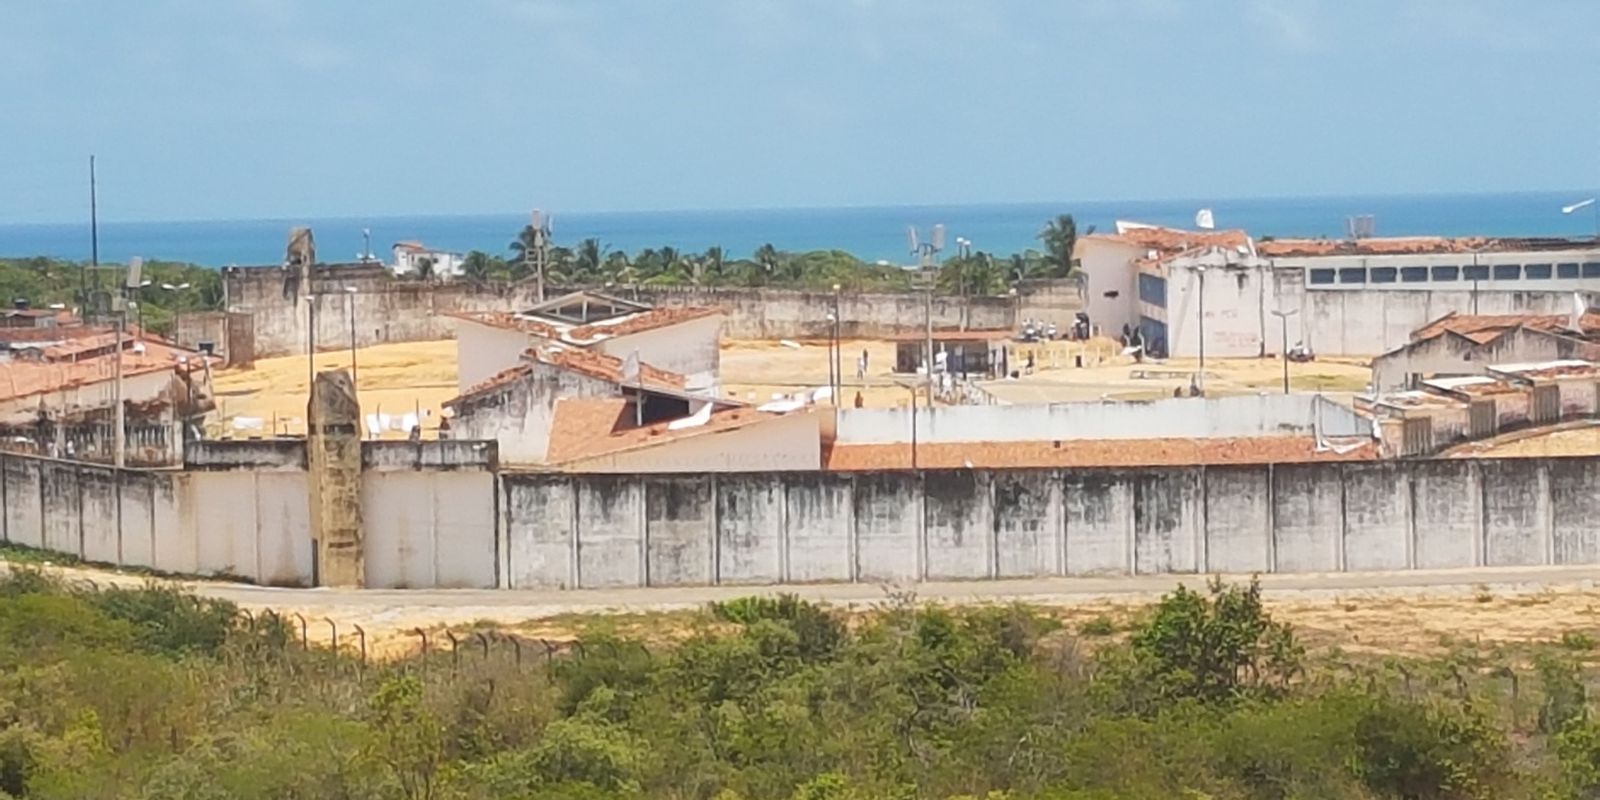 MPF asks for information about the prison system in Rio Grande do Norte